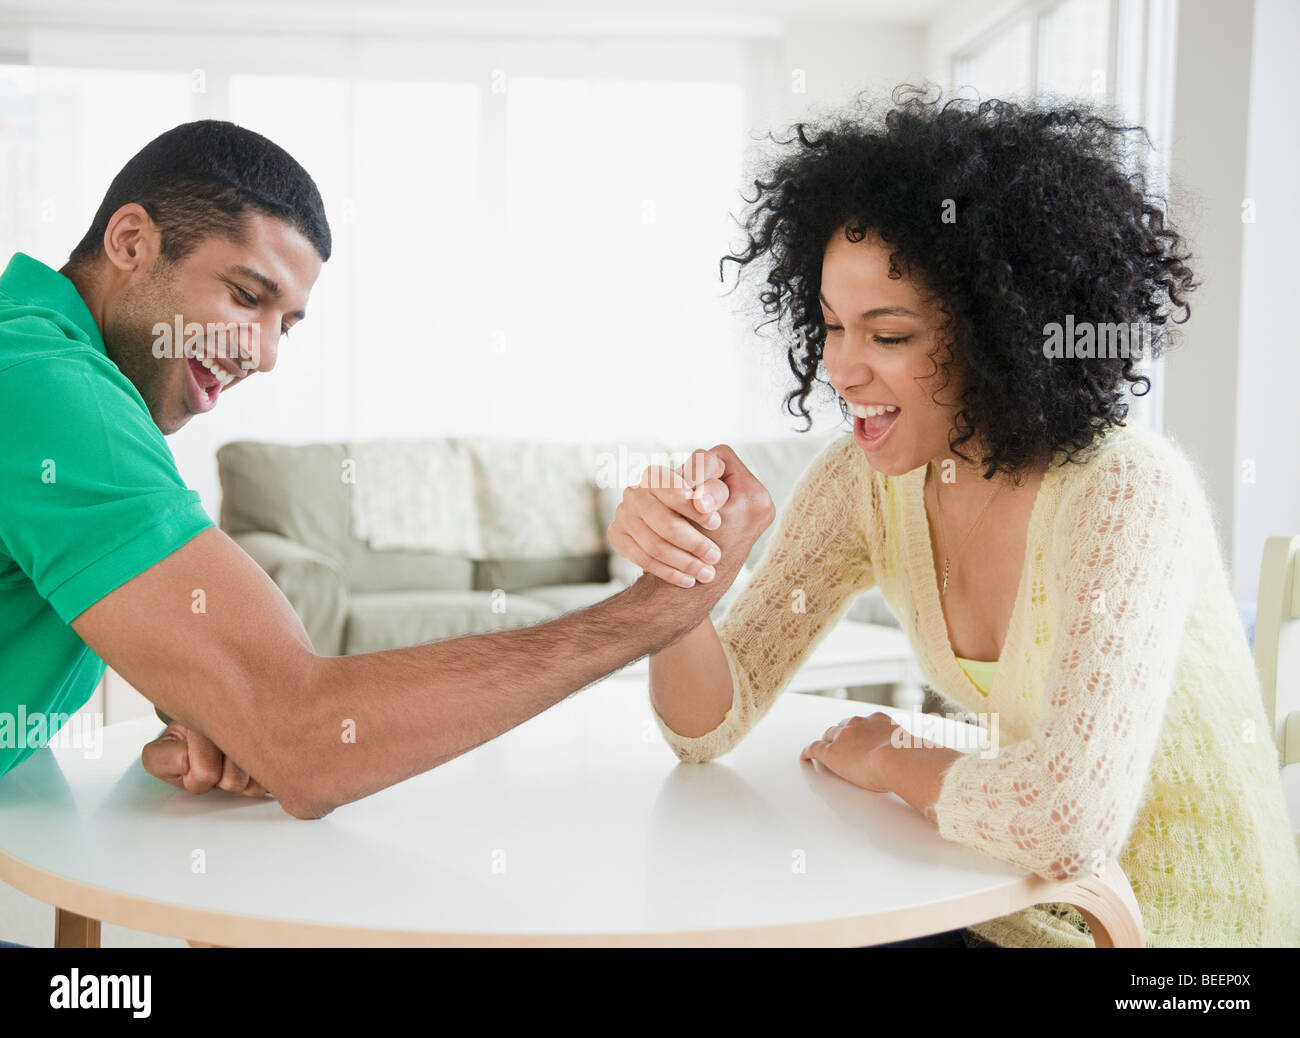 Husband Wife Arm Wrestling High Resolution Stock Photography and pic